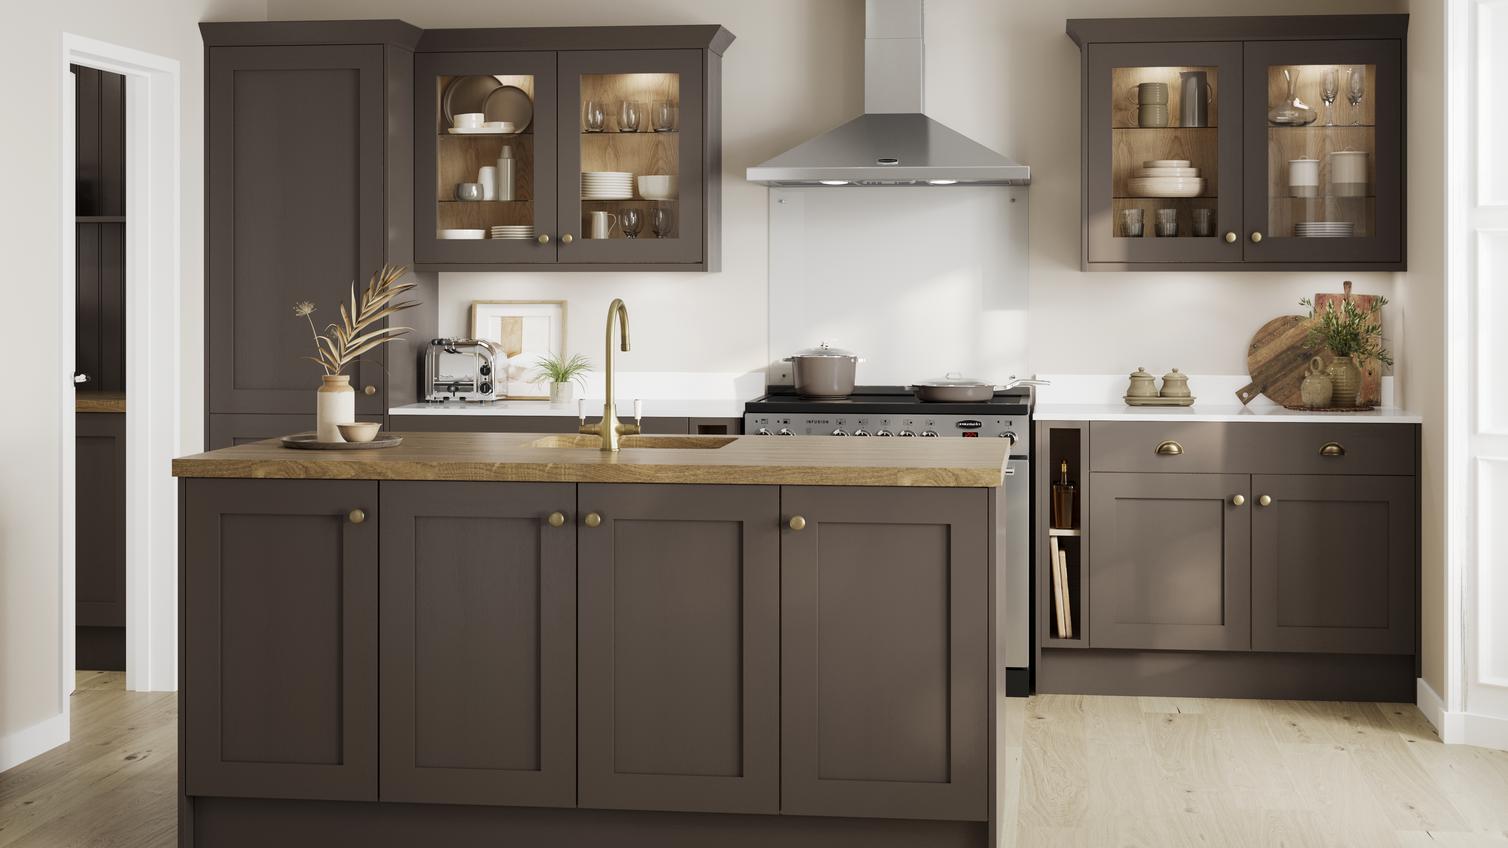 A truffle brown kitchen in a shaker style and peninsula layout. It has wood worktops, brass accessories, and glass cabinets.